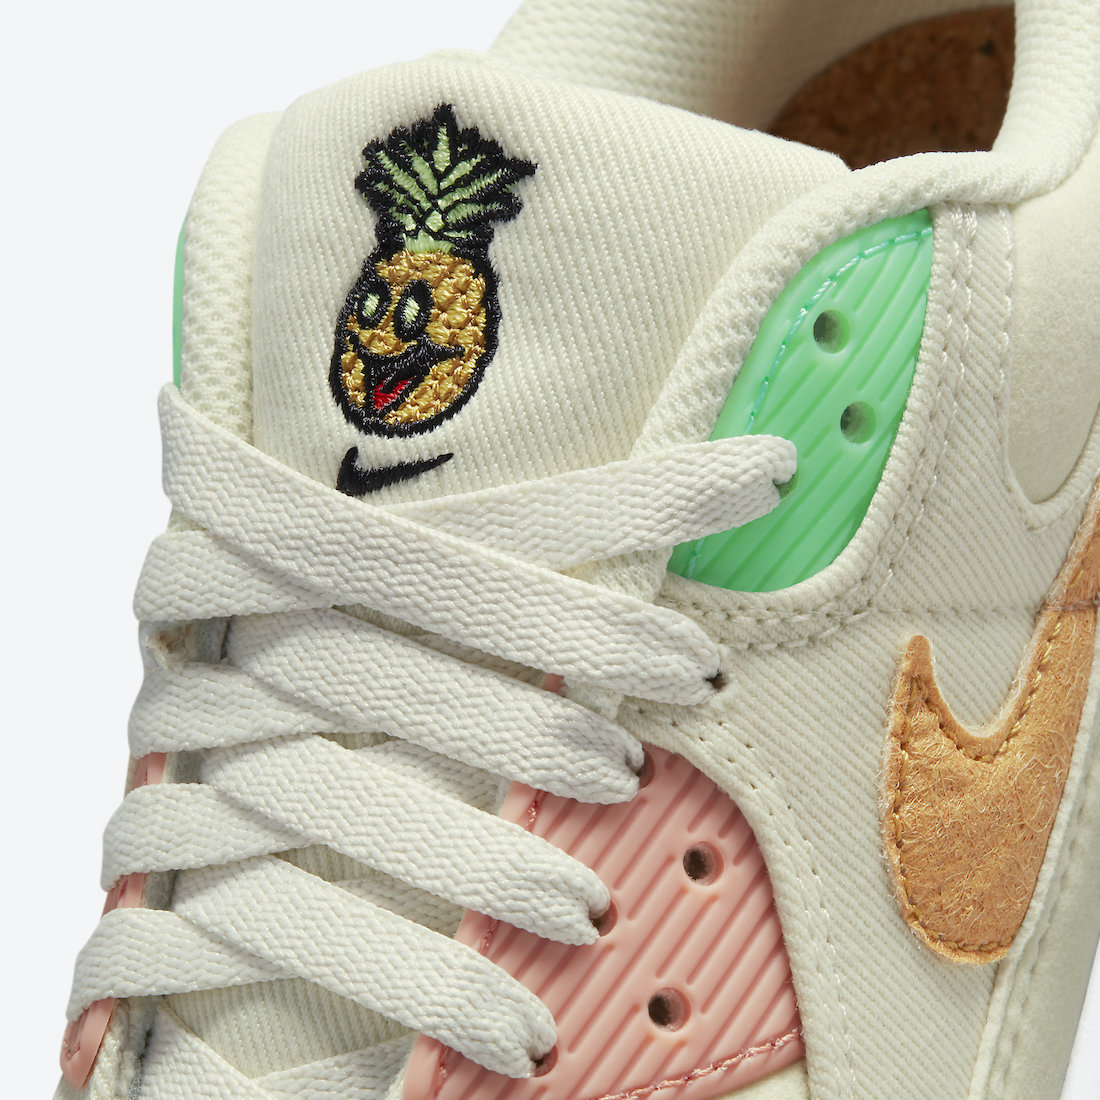 Nike Air Max 90 Happy Pineapple DC5211-100 Release Date